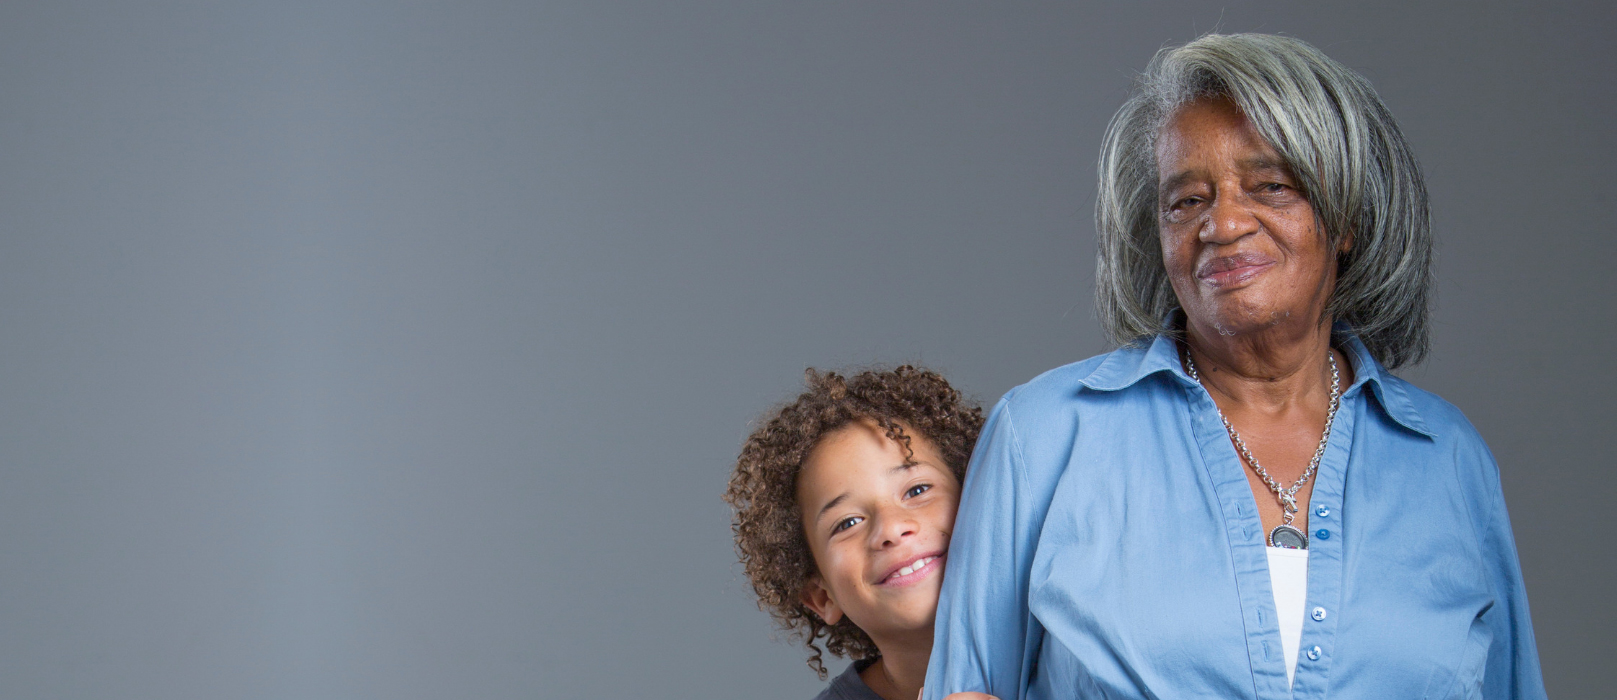 Celebrate Grandparents' Day With This Children's Message